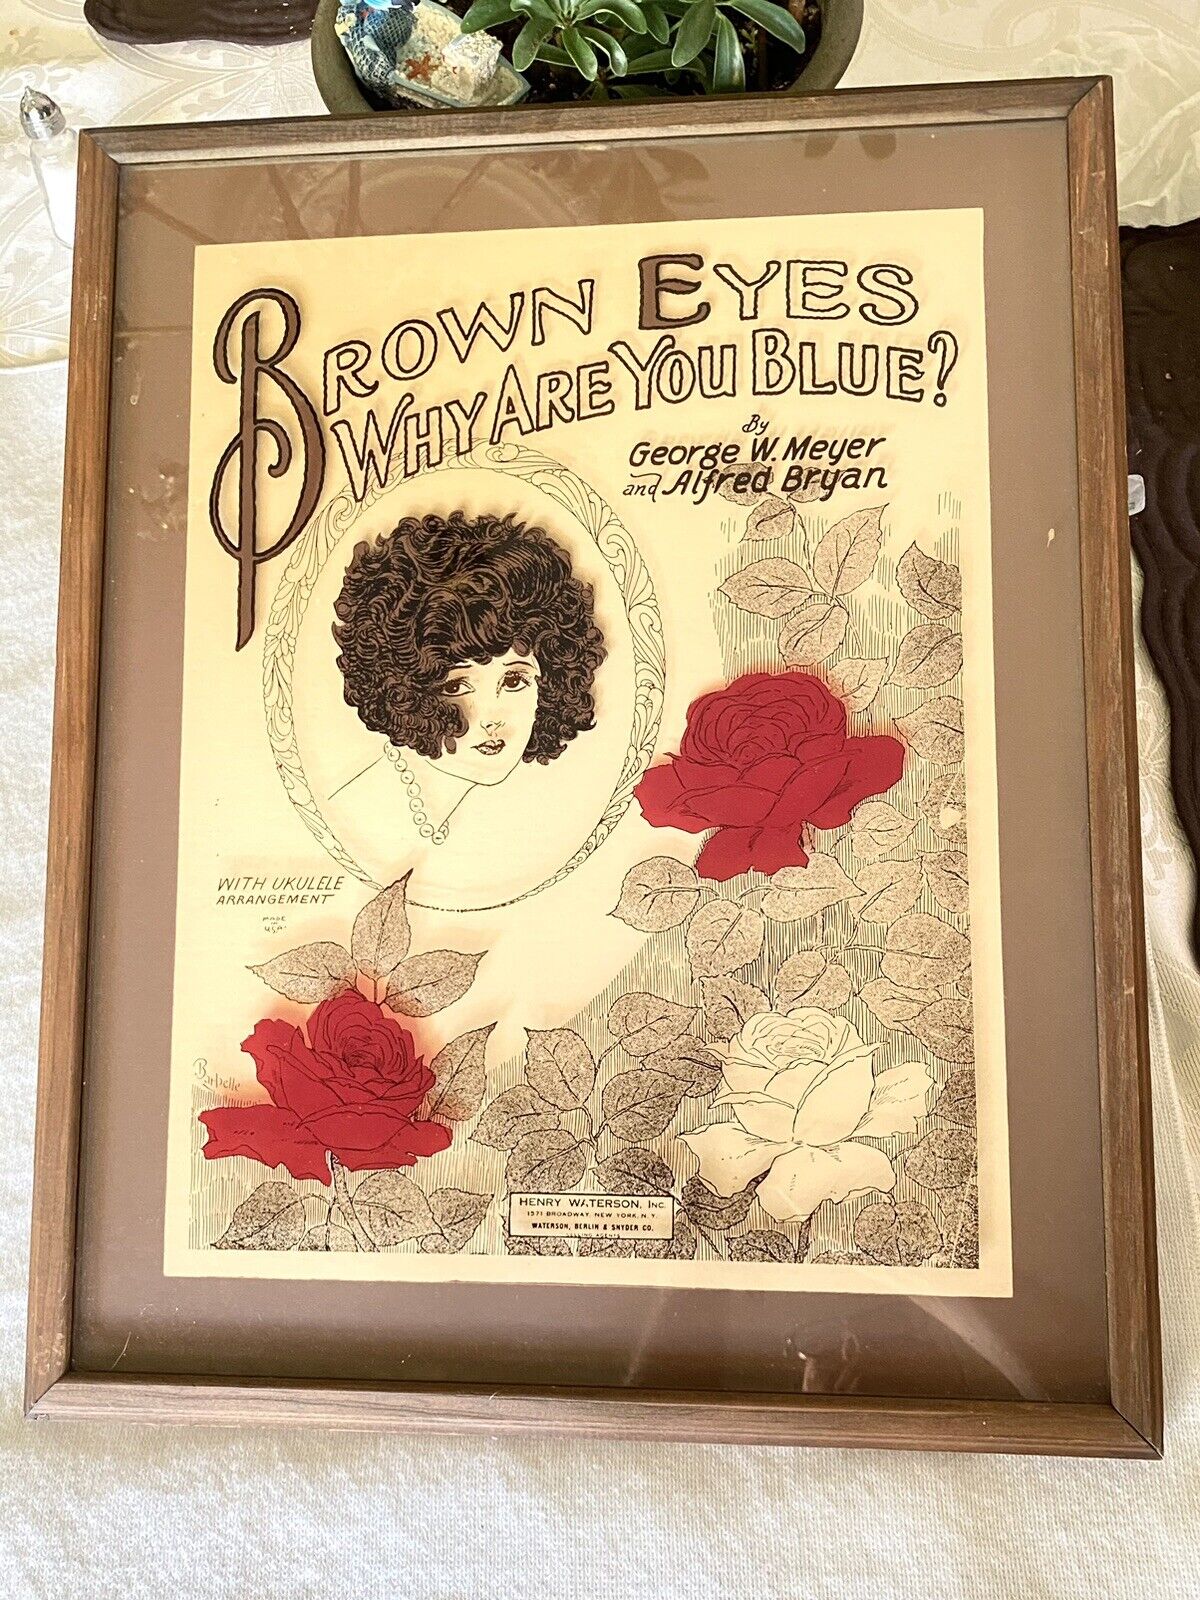 💥 Rare Reverse Painted Glass “Brown Eyes Why Are You Blue” Framed Cover Art